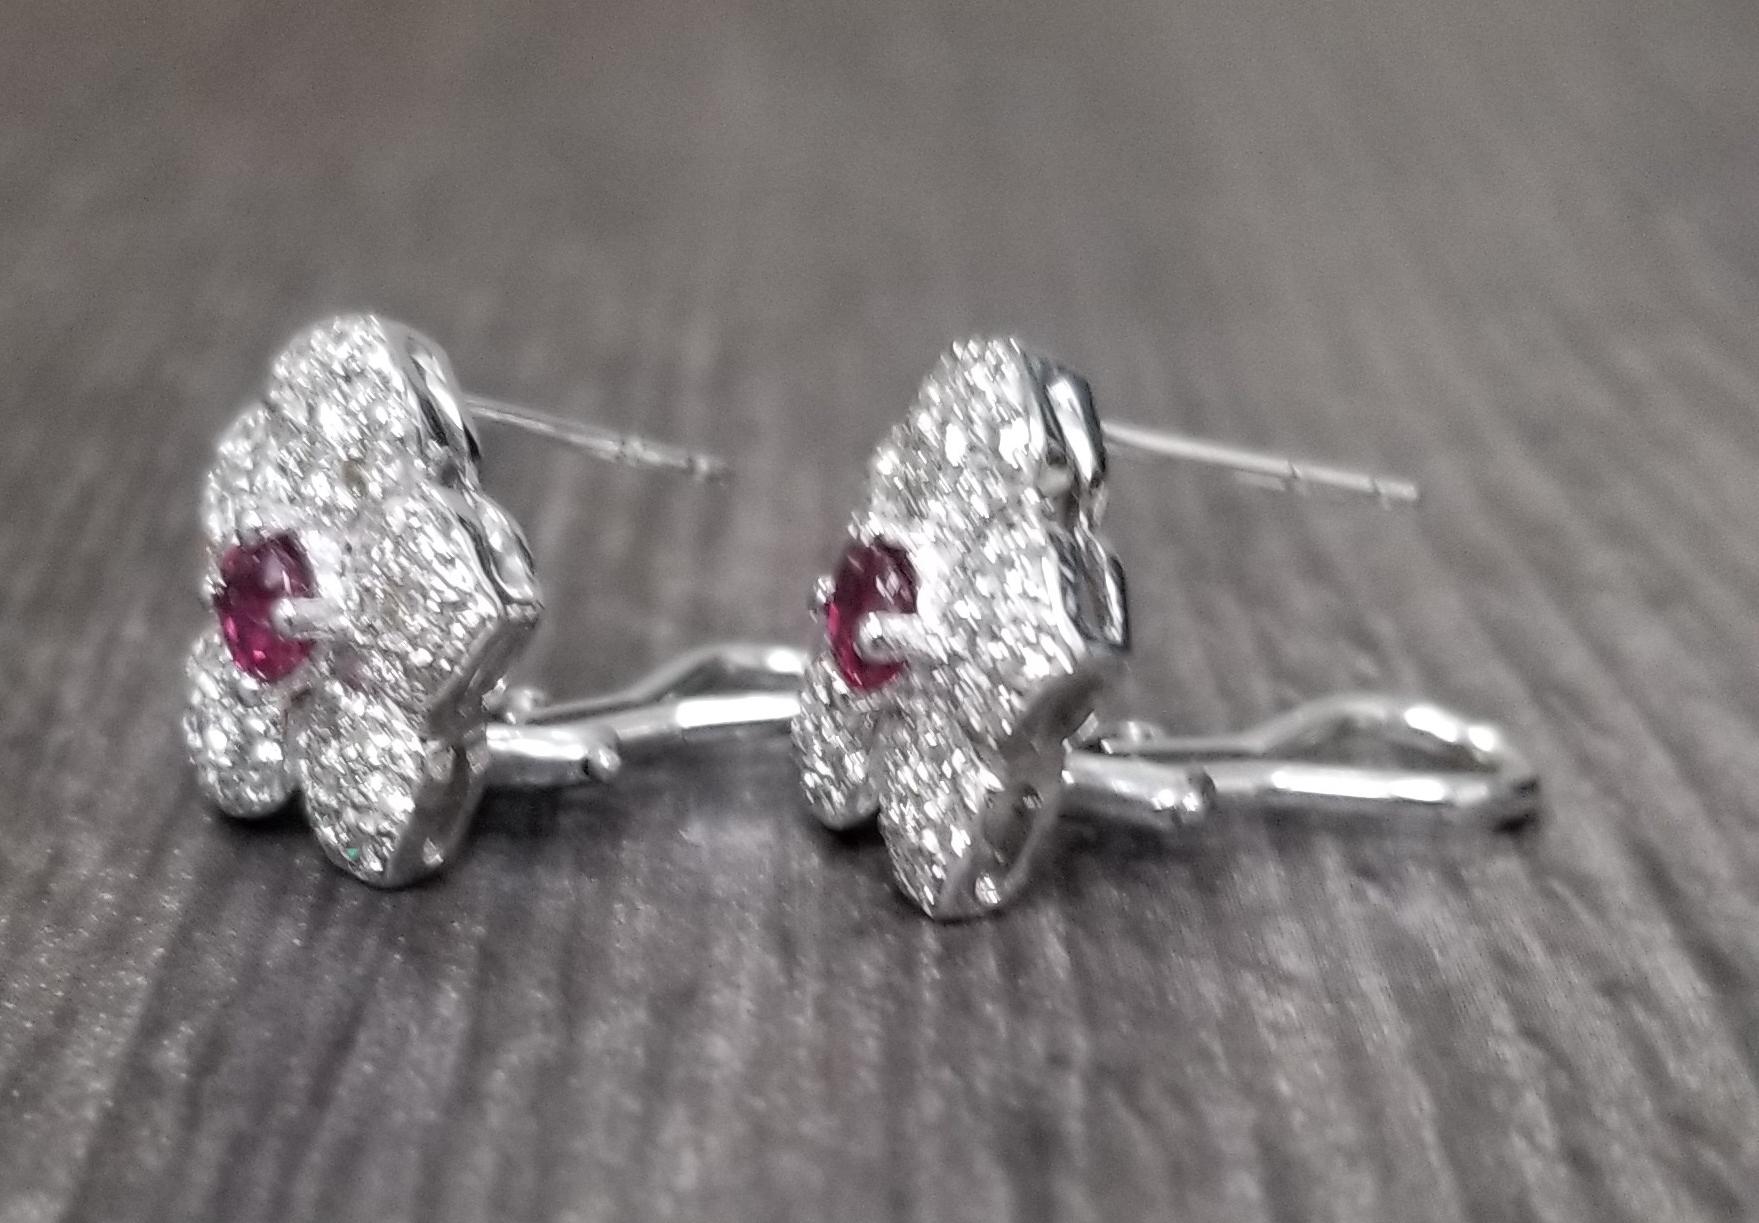 14k white gold ruby and diamond earrings containing 2 round rubies of gem quality weighing .46pts. and 80 round full cut diamonds of very fine quality weighing .80pts. paved in a floral with 14k white gold omega backs for comfort.